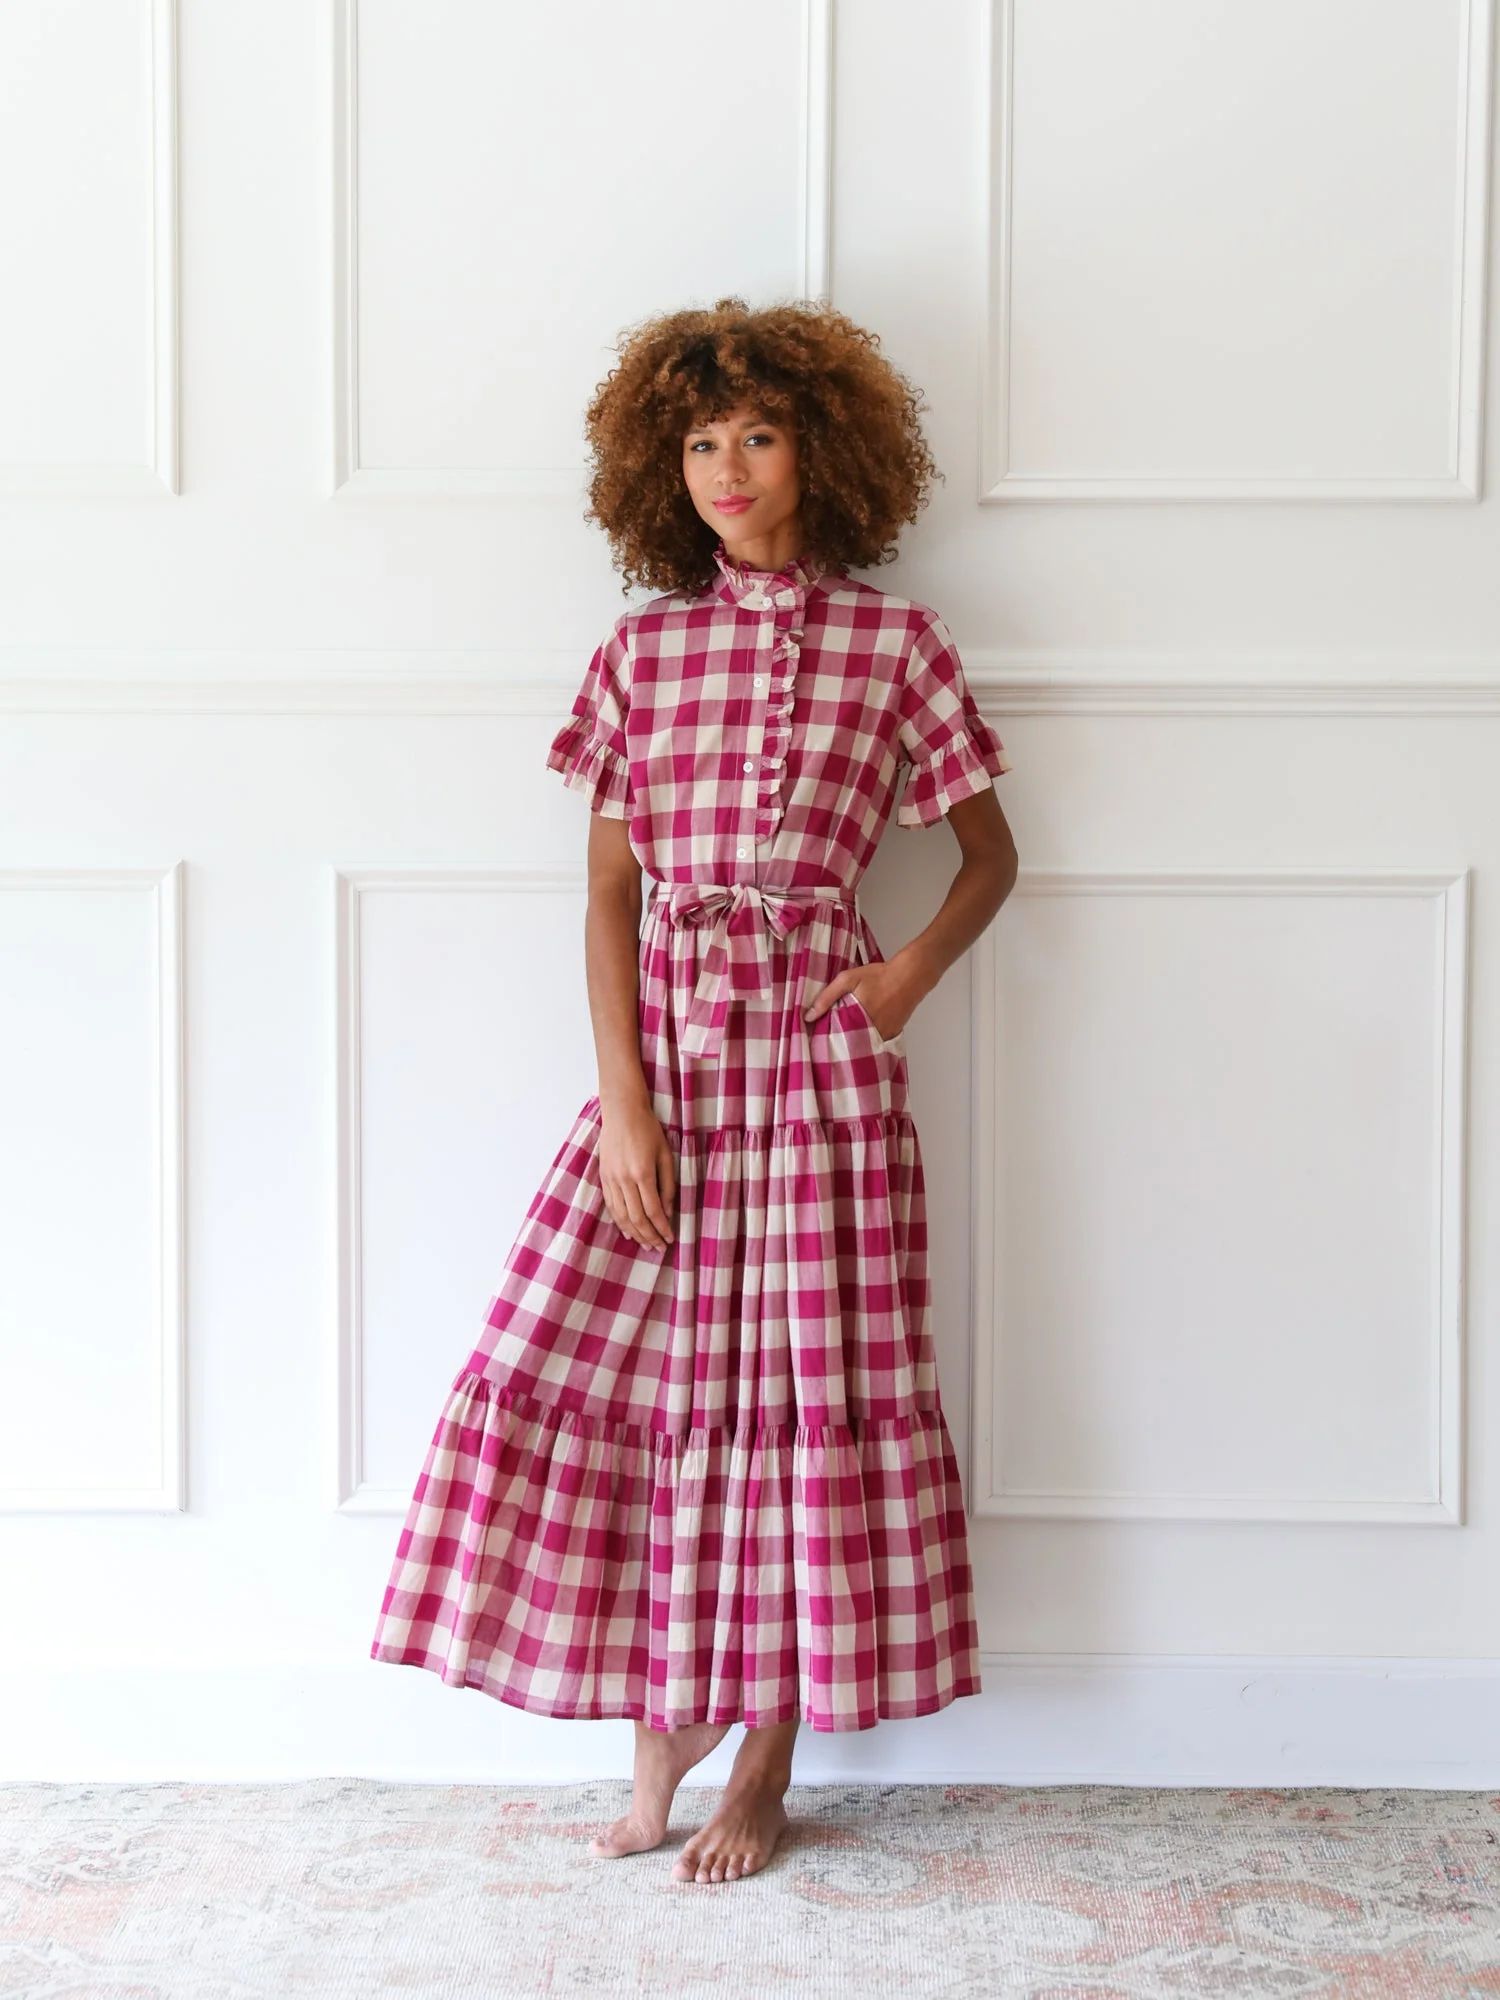 Shop Mille - Victoria Dress in Raspberry Plaid | Mille